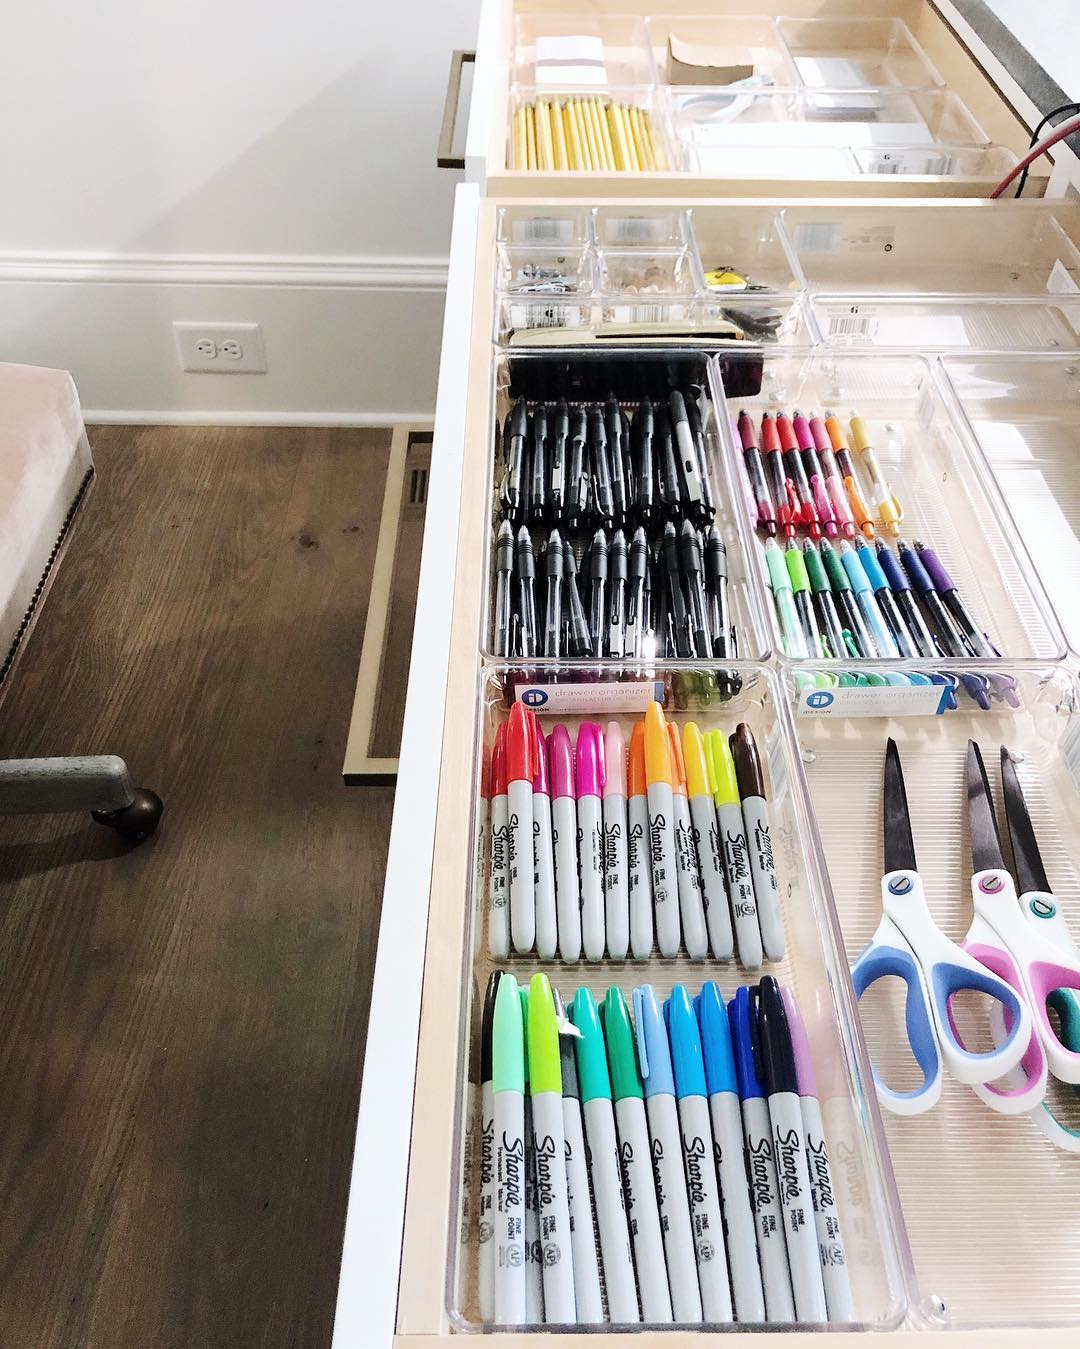 Pens and markers organized in a drawer. Photo by Instagram user @getminimized